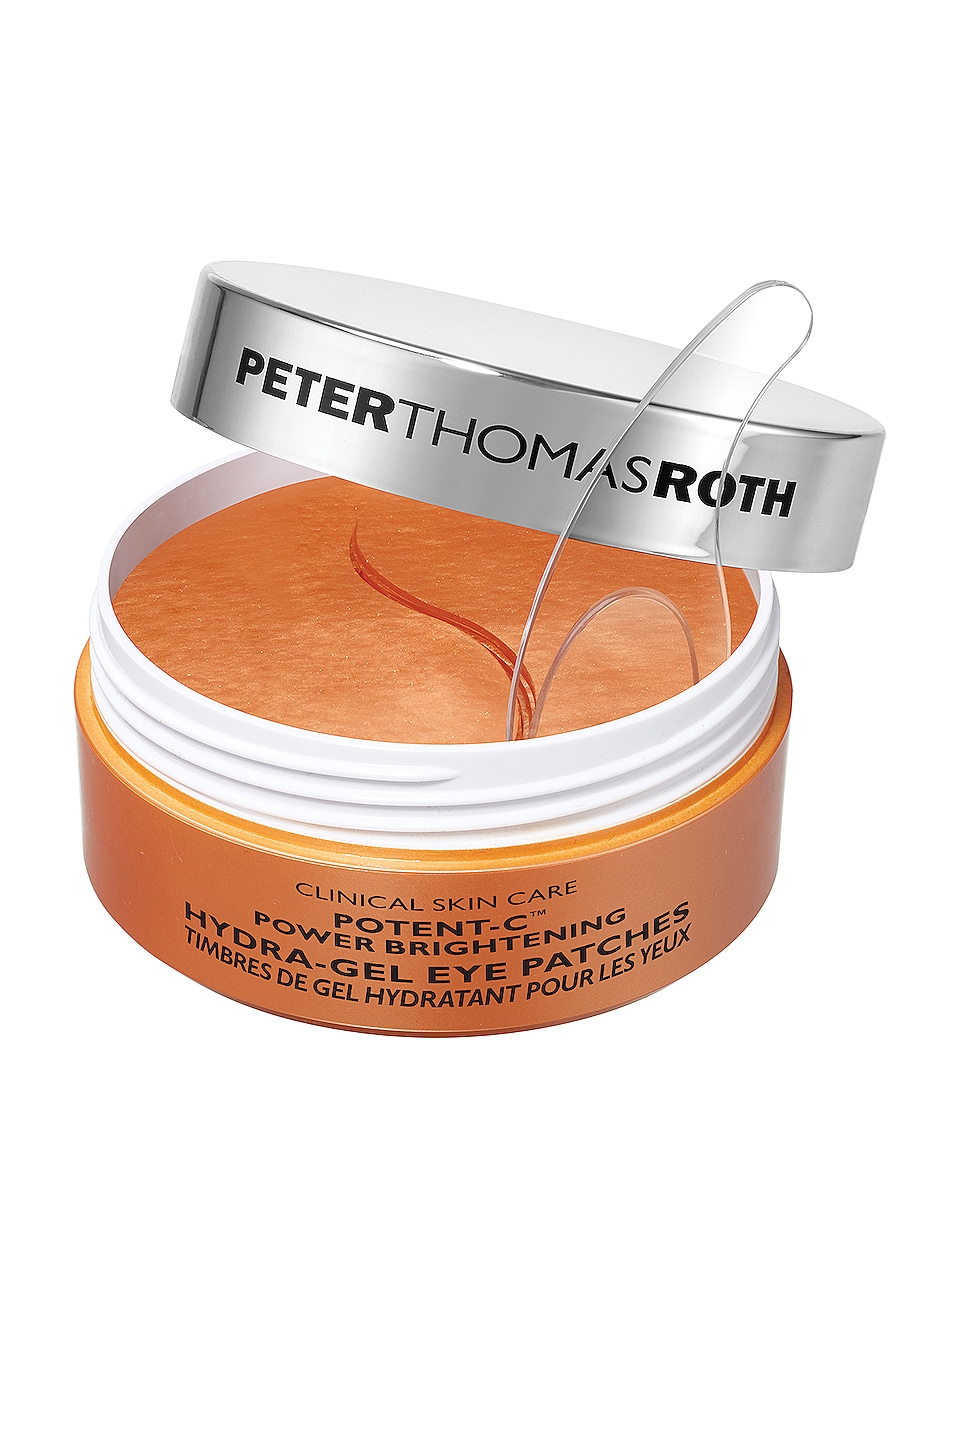 PETER THOMAS ROTH POTENT-C POWER BRIGHTENING HYDRA-GEL EYE PATCHES,PTHO-WU88